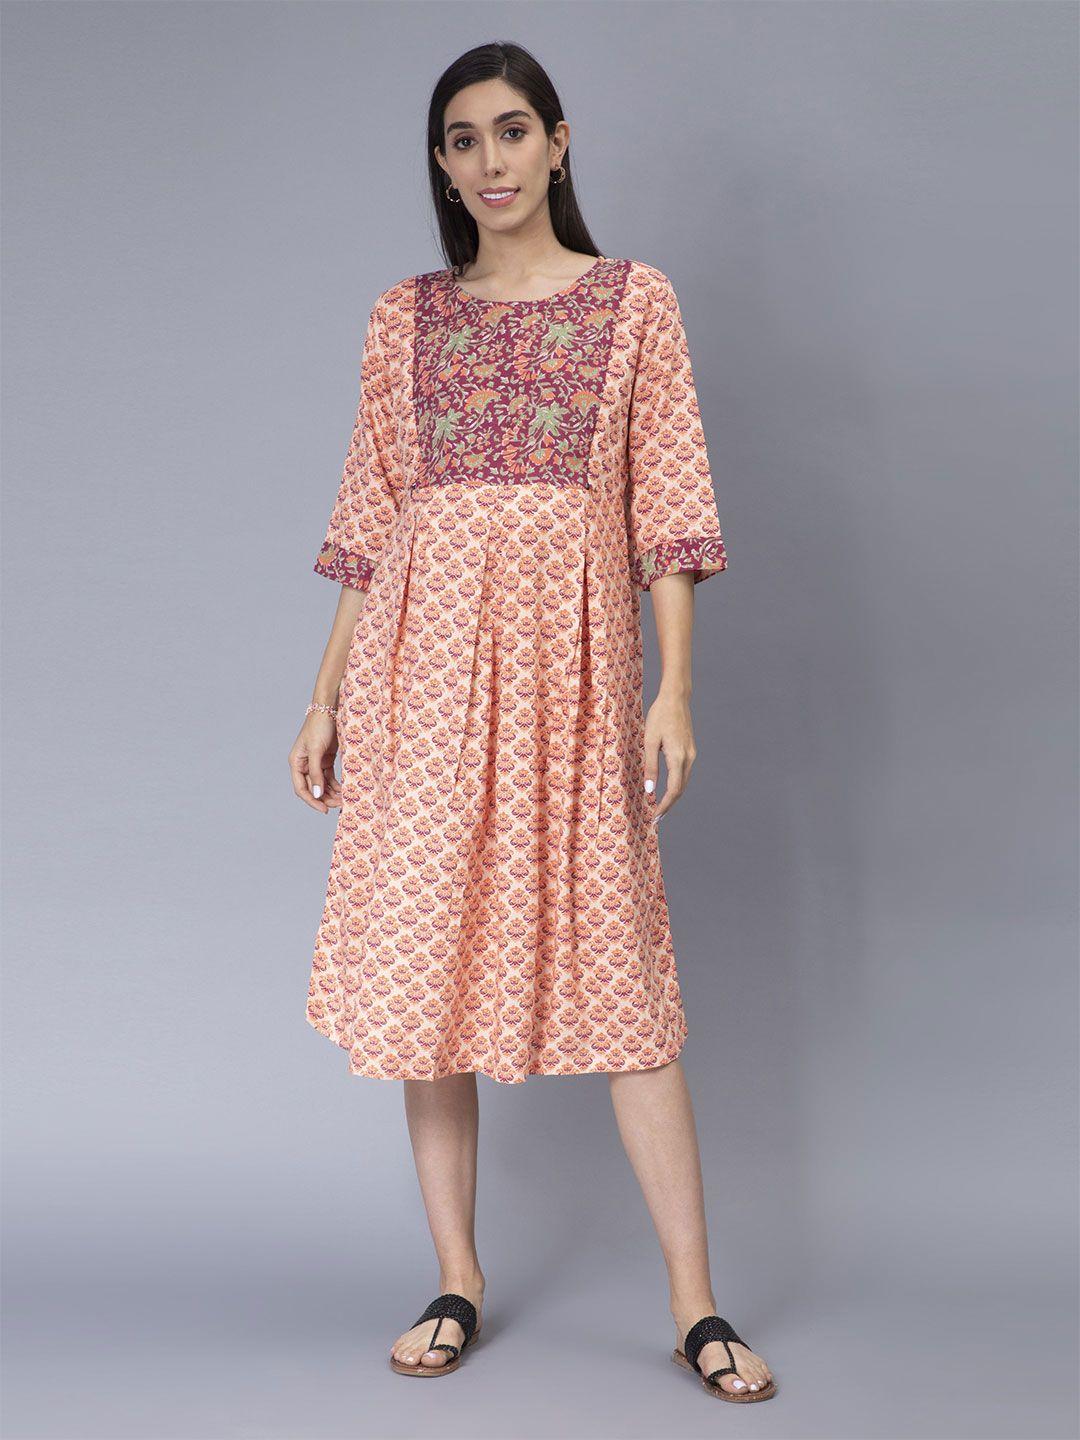 cot'n soft ethnic motifs printed round neck cotton a-line maternity dress